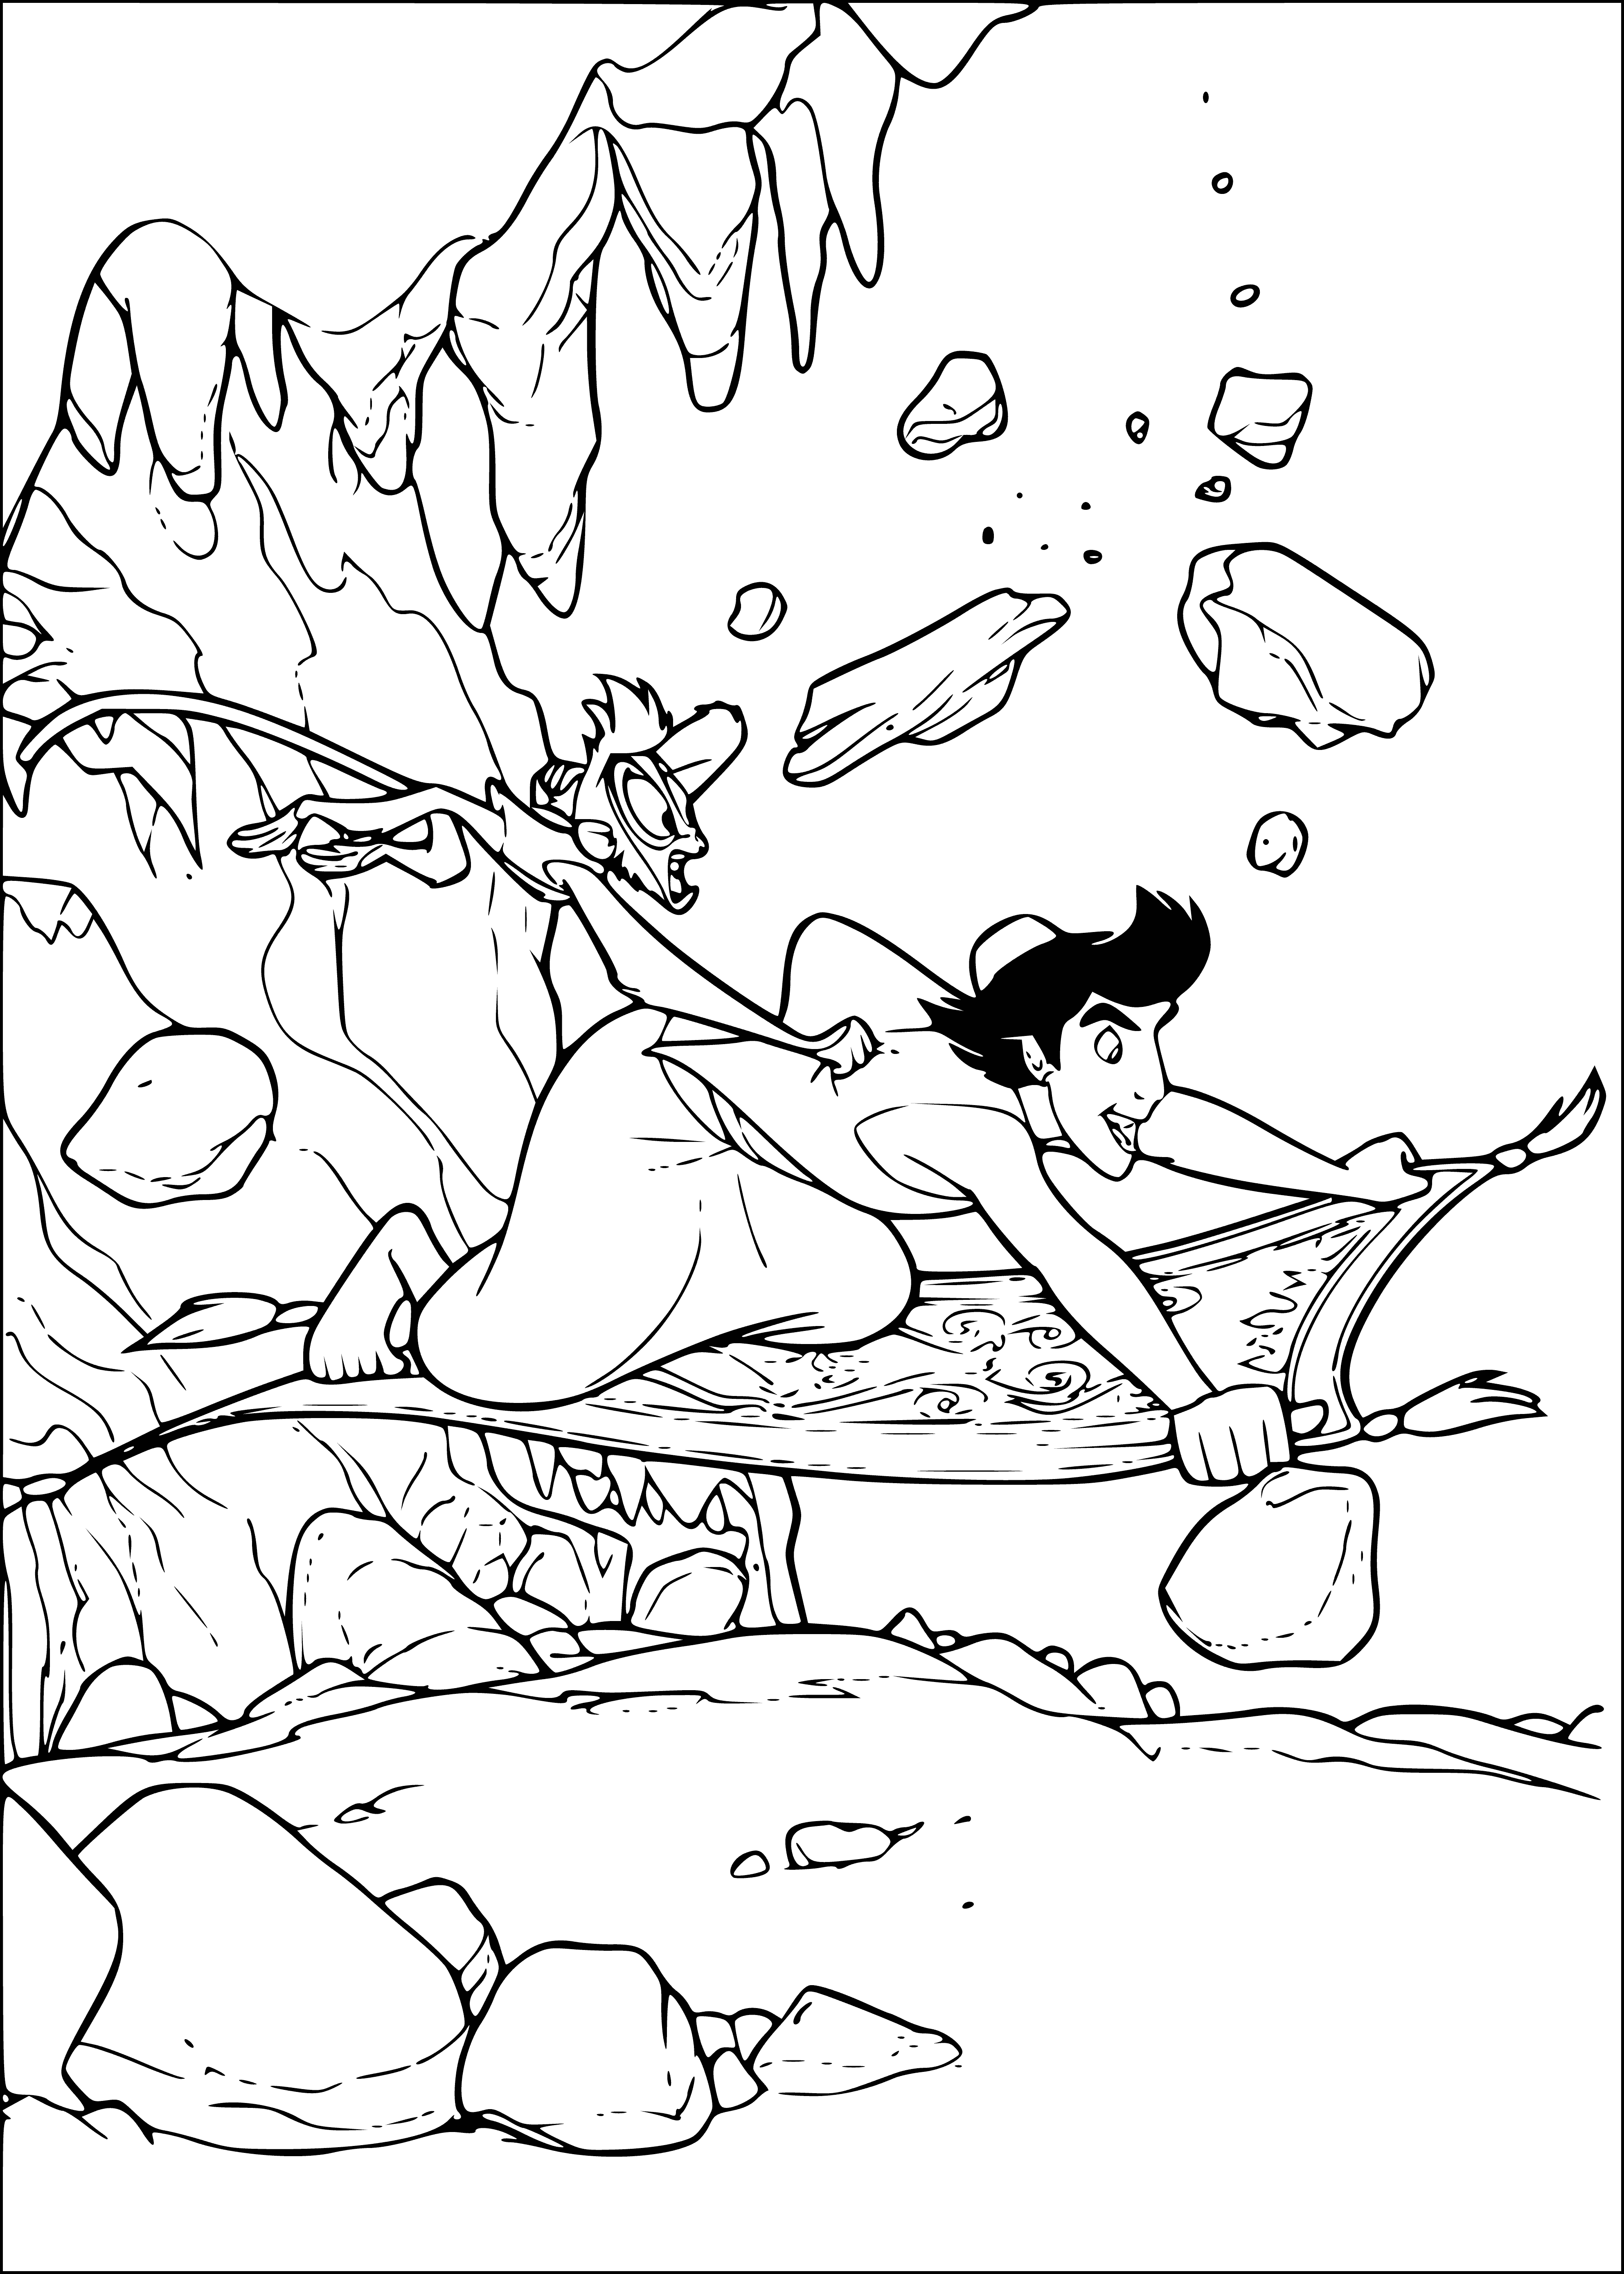 Stonefall coloring page